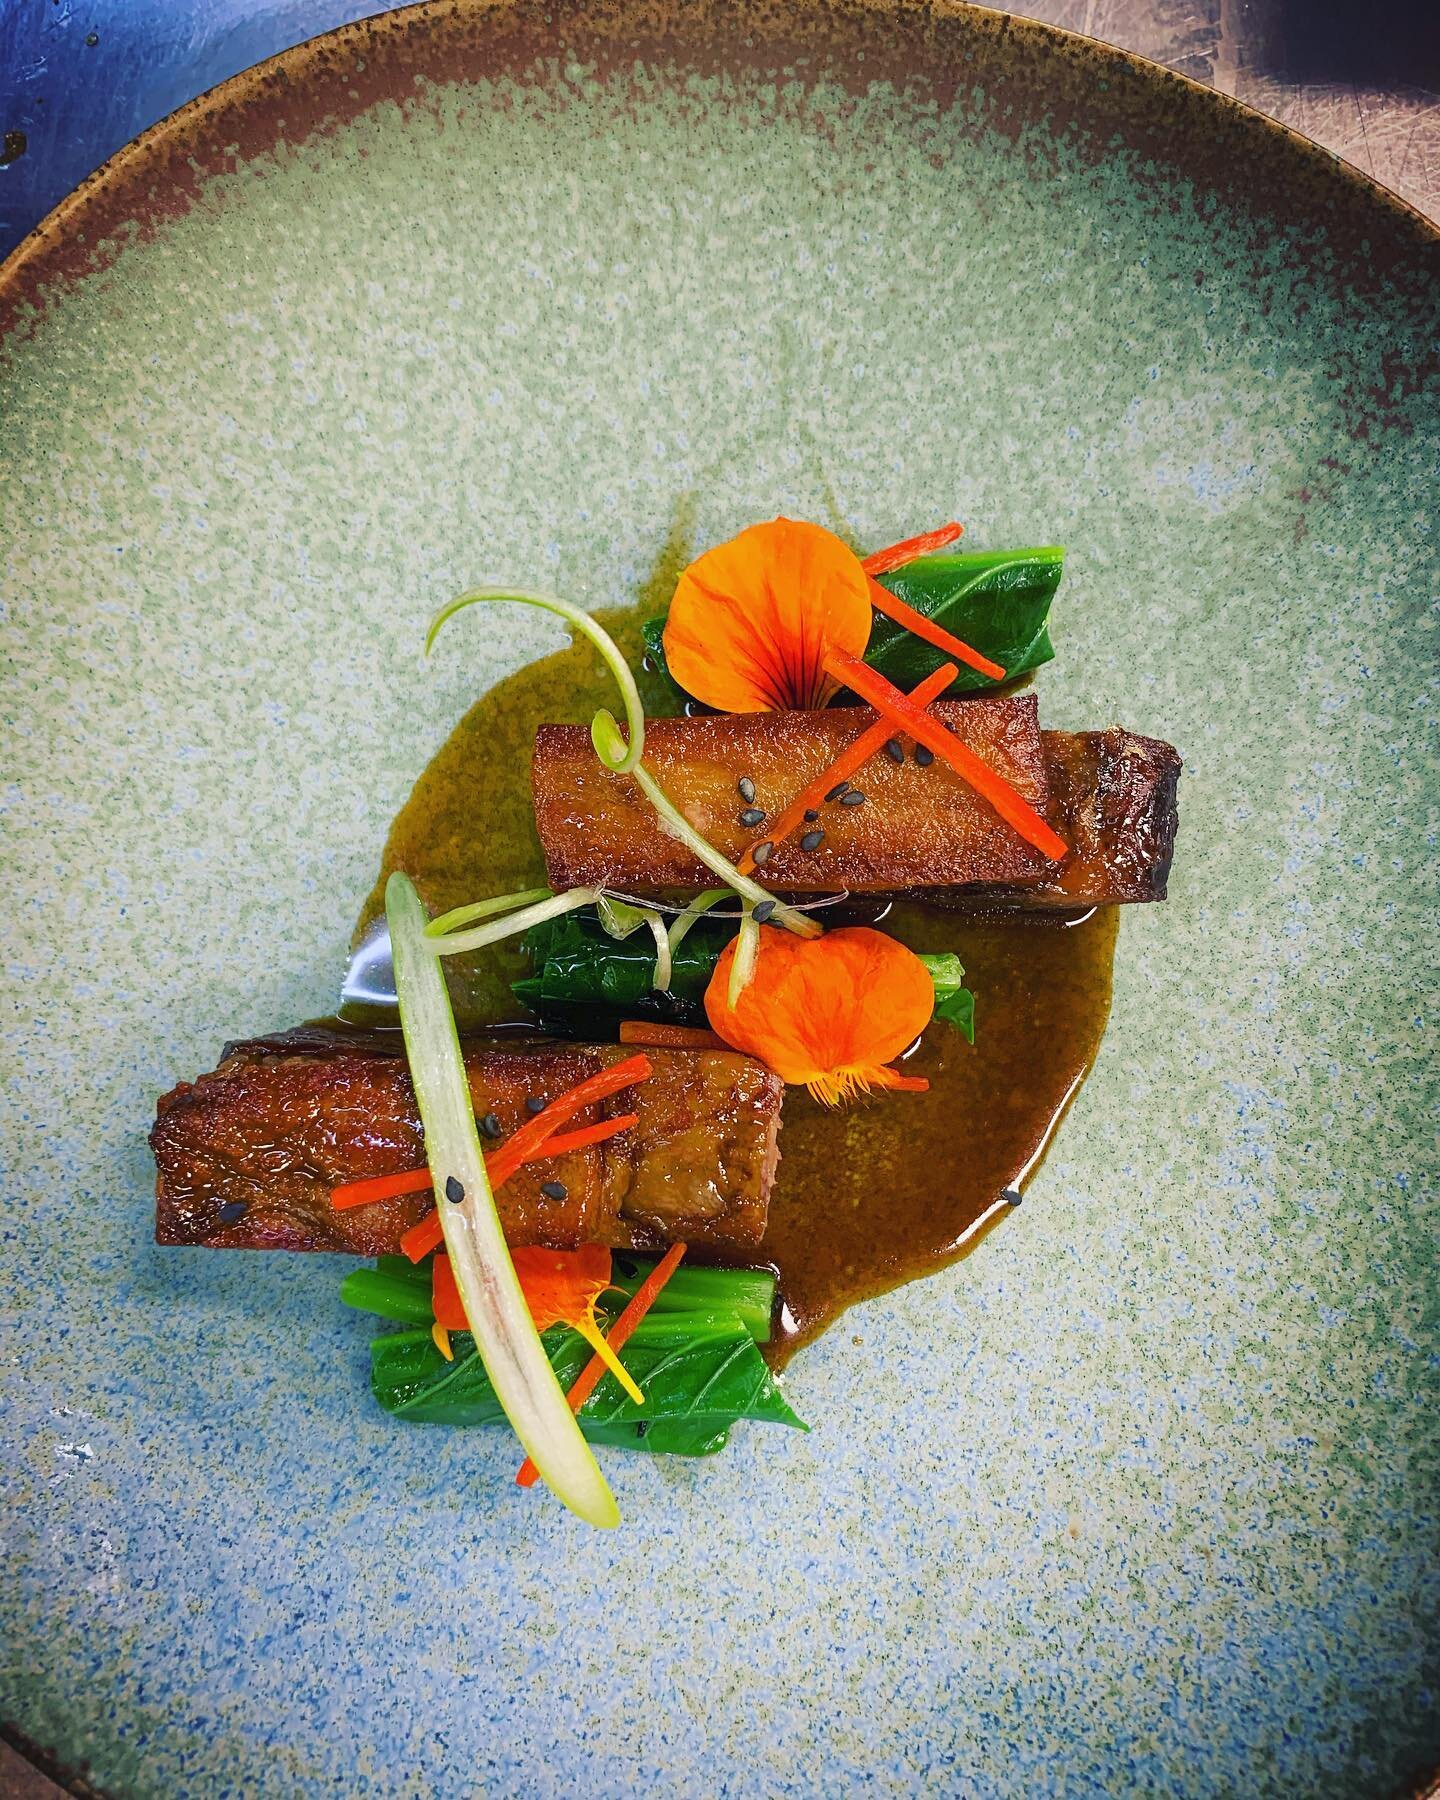 Soy Braised beef short ribs 
.
.
.
#cooking #cook #chef #shortribs #sydneyfood #plating #foodphotography